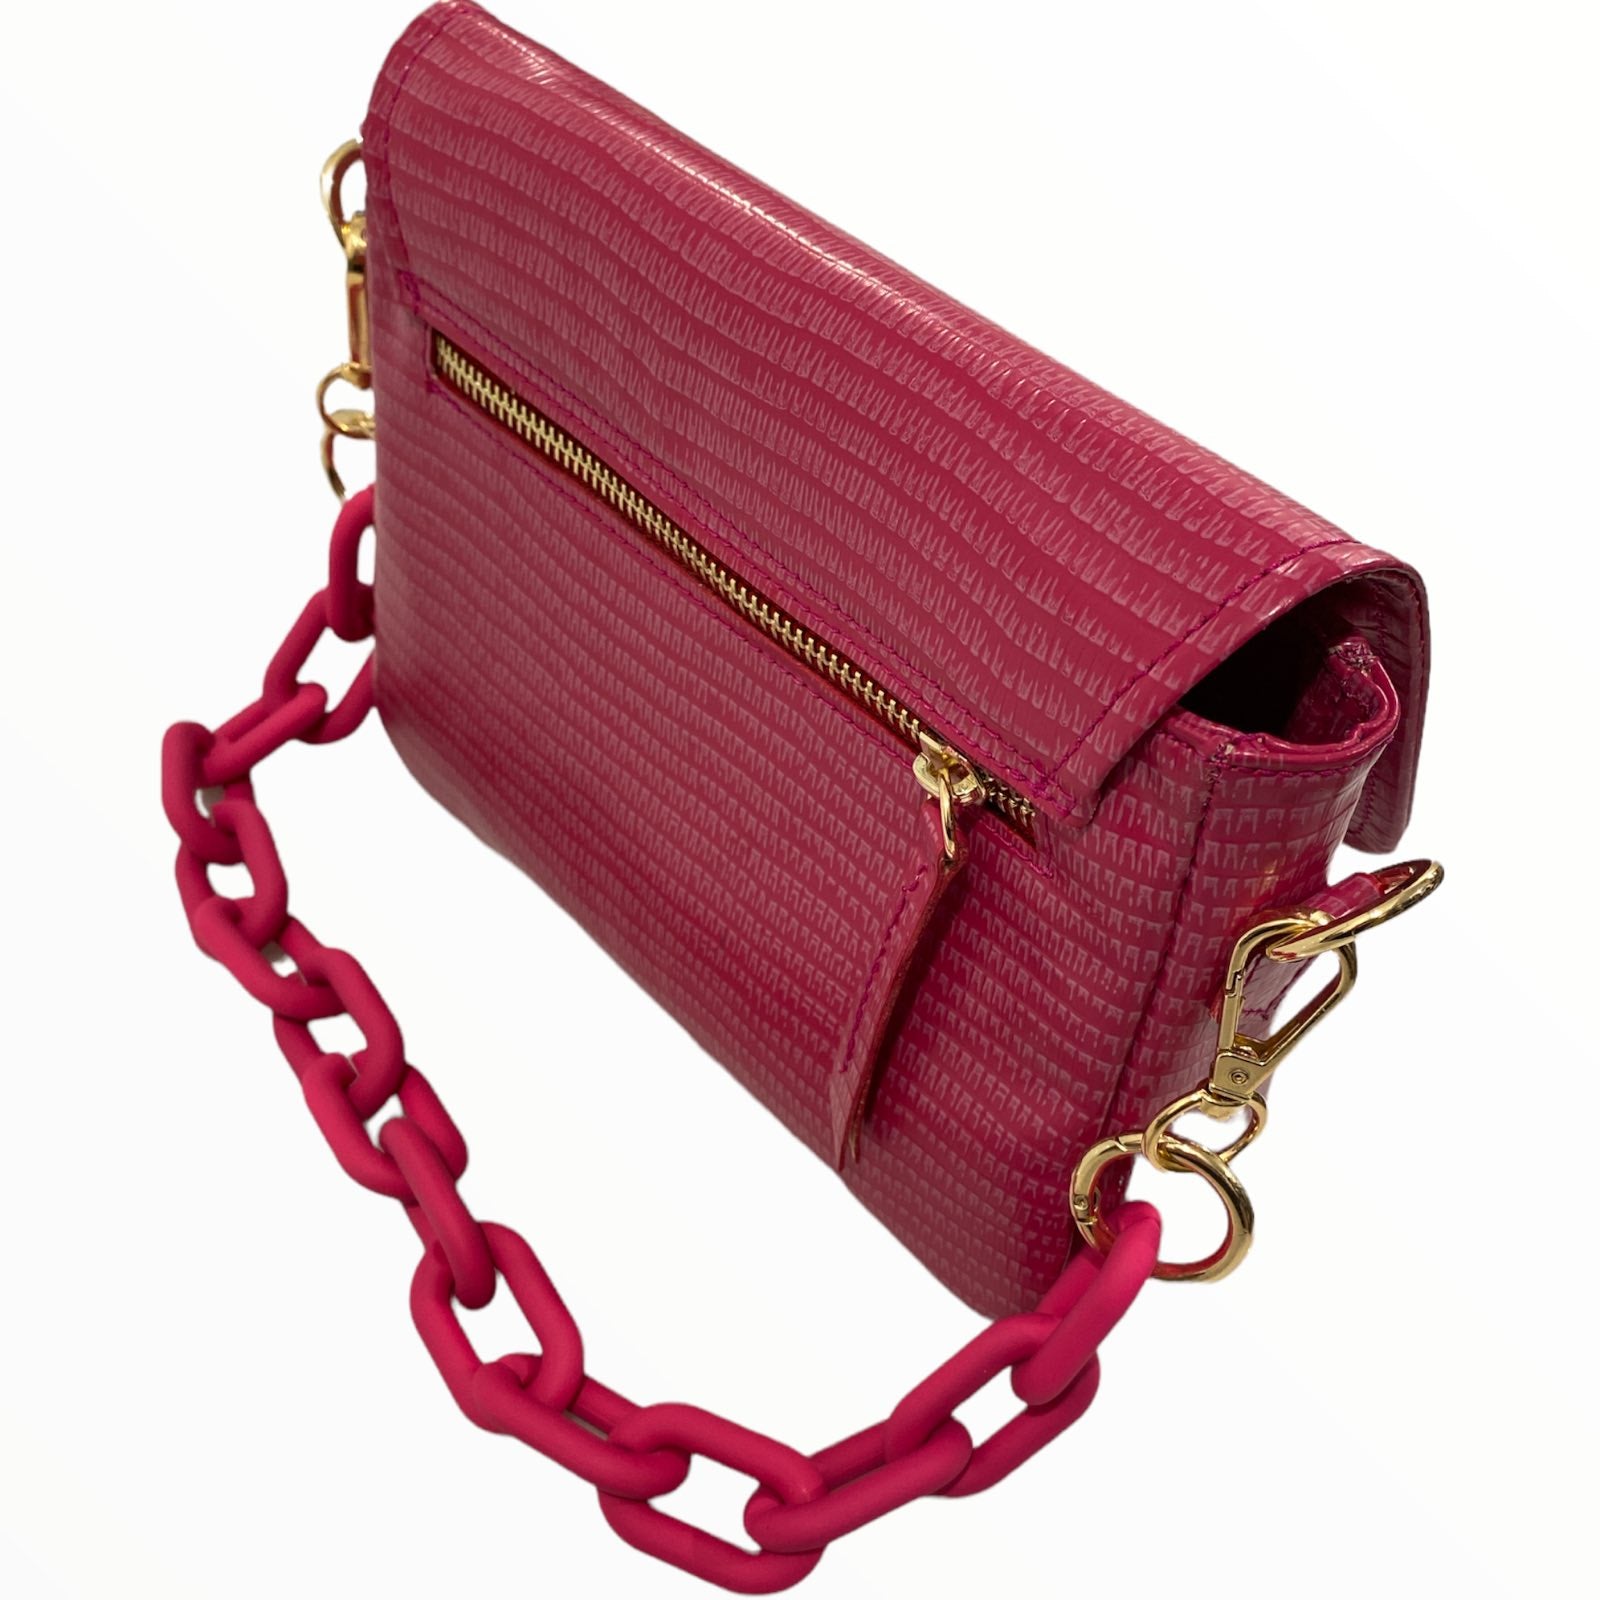 Mandy mini. Strong pink leather limited edition bag